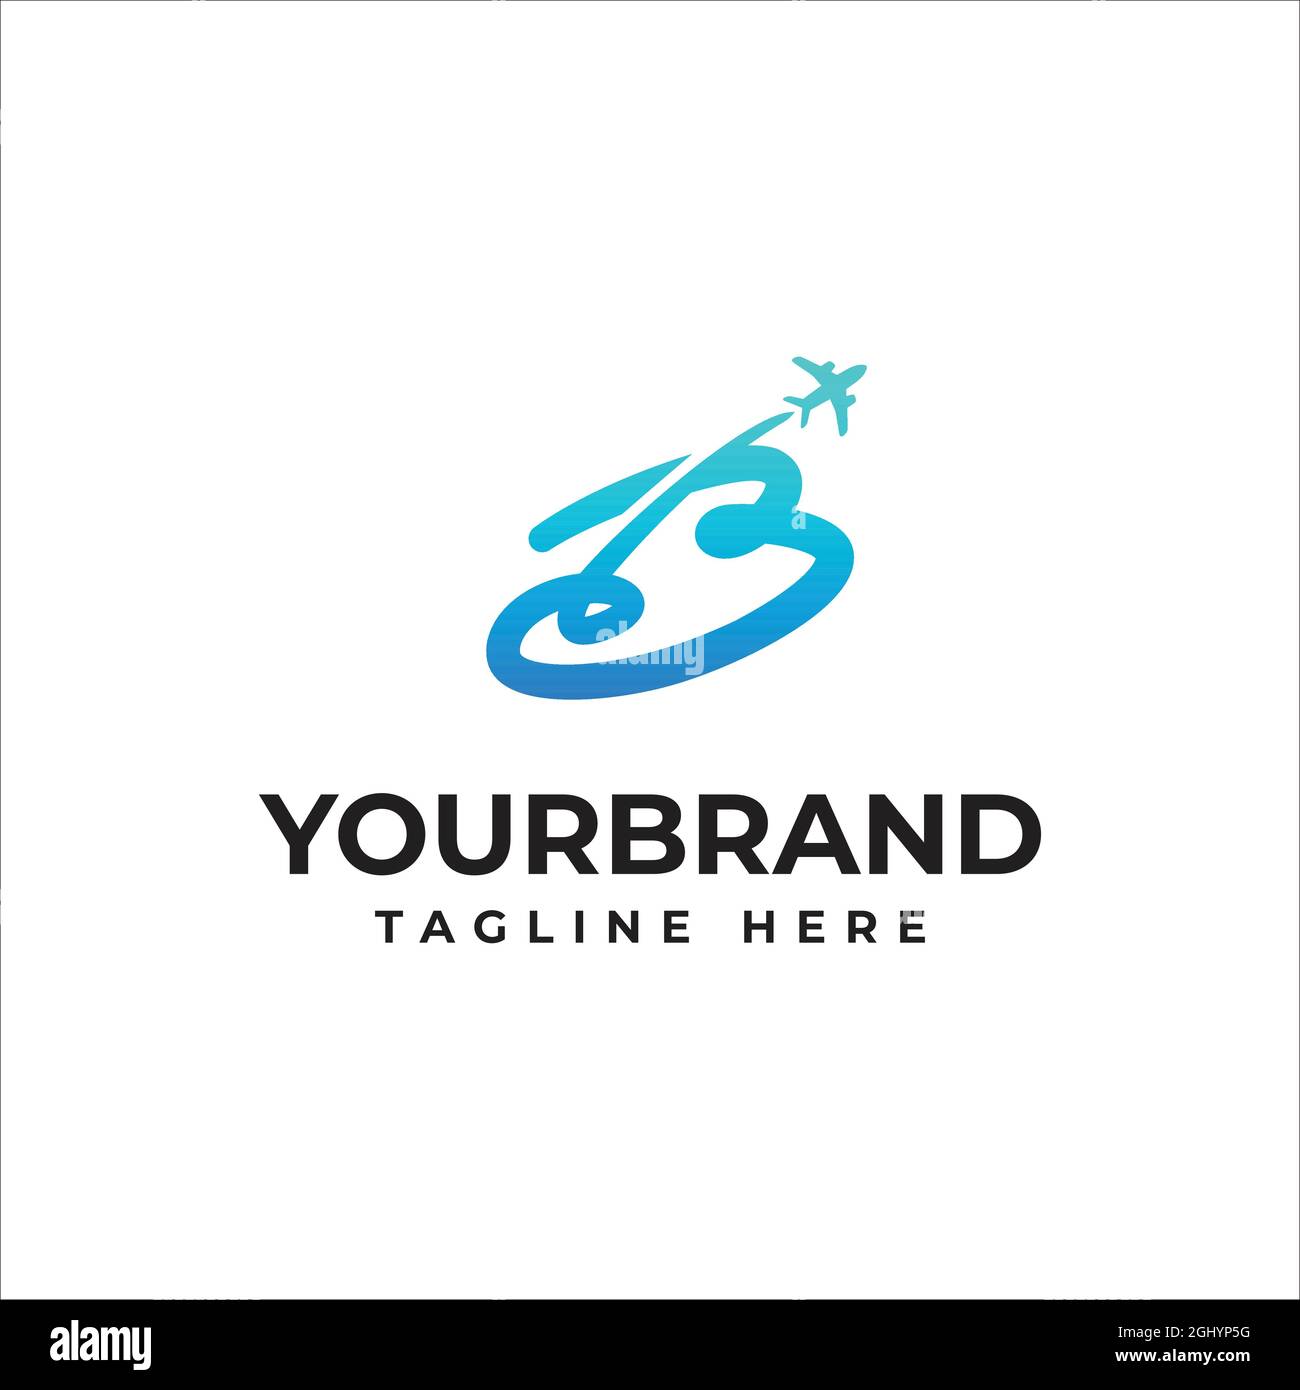 Airplane logo design with capital letter B, vector illustration Stock Vector